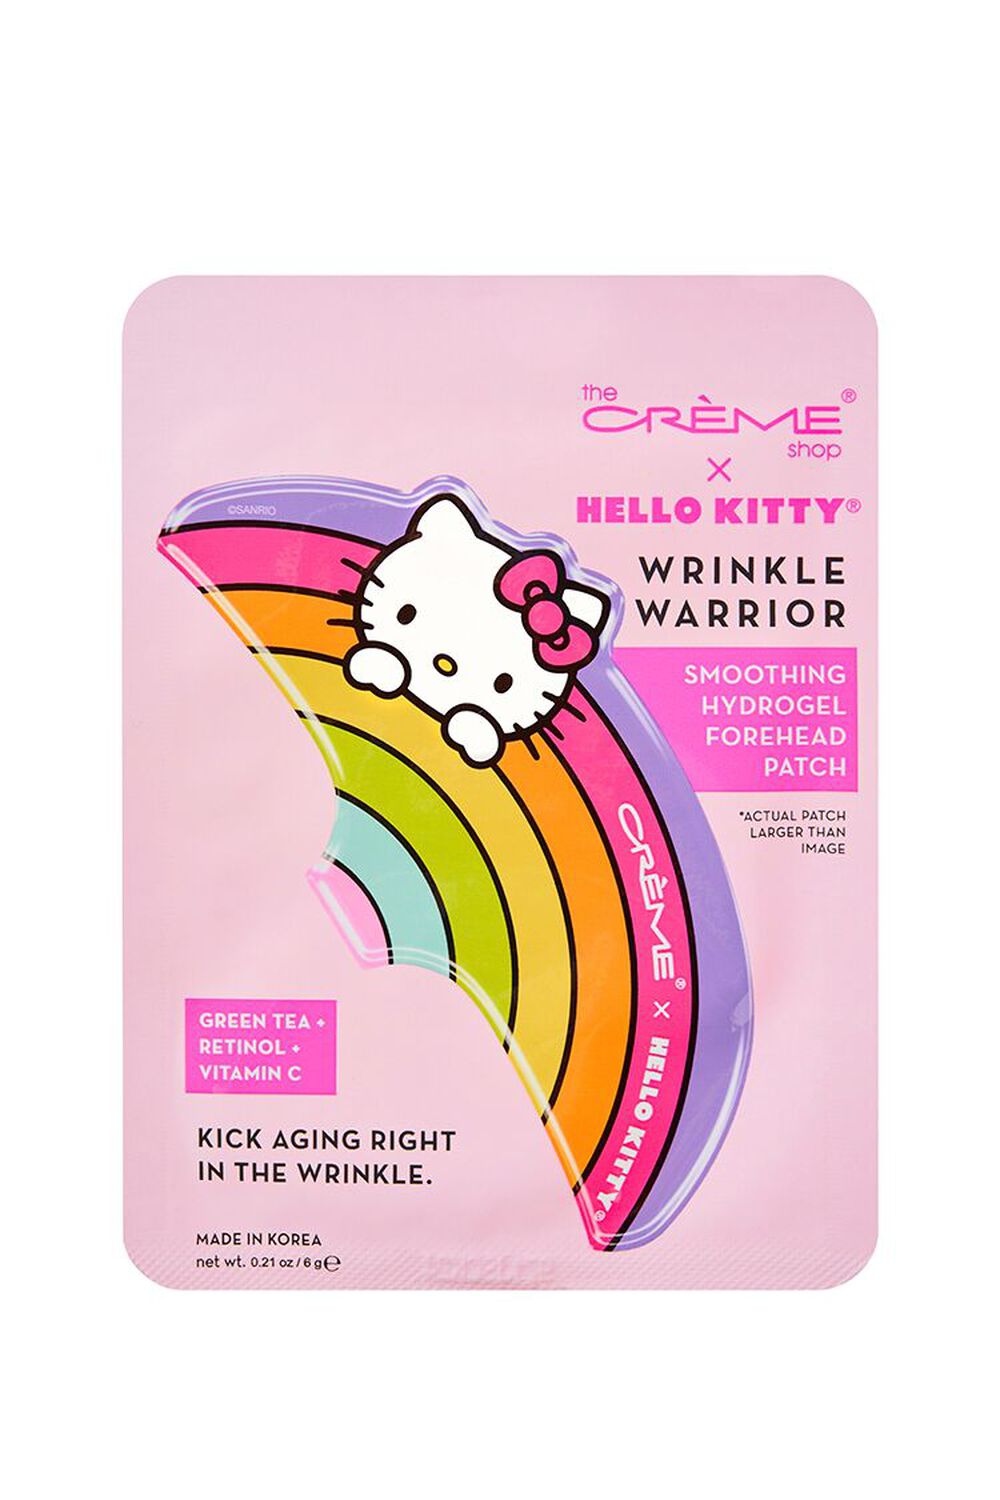 The Crème Shop Hello Kitty - Wrinkle Warrior Smoothing Hydrogel Forehead Patch, image 3